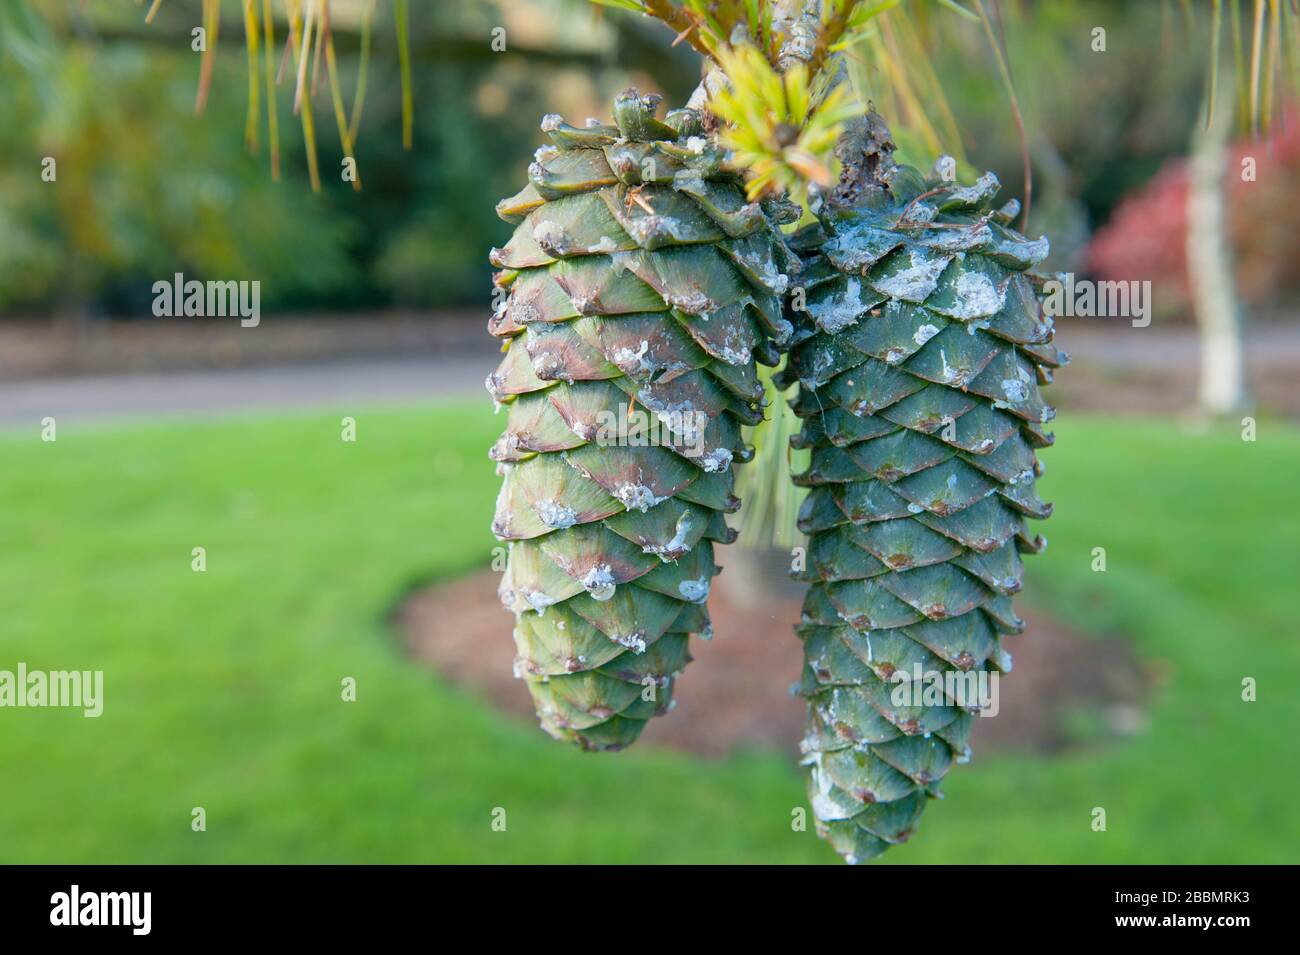 Close Up of a Cone of the Pine or Pinus (Pinaceae) Tree in the Arboretum, at Rosemoor, Devon, England, UK Stock Photo